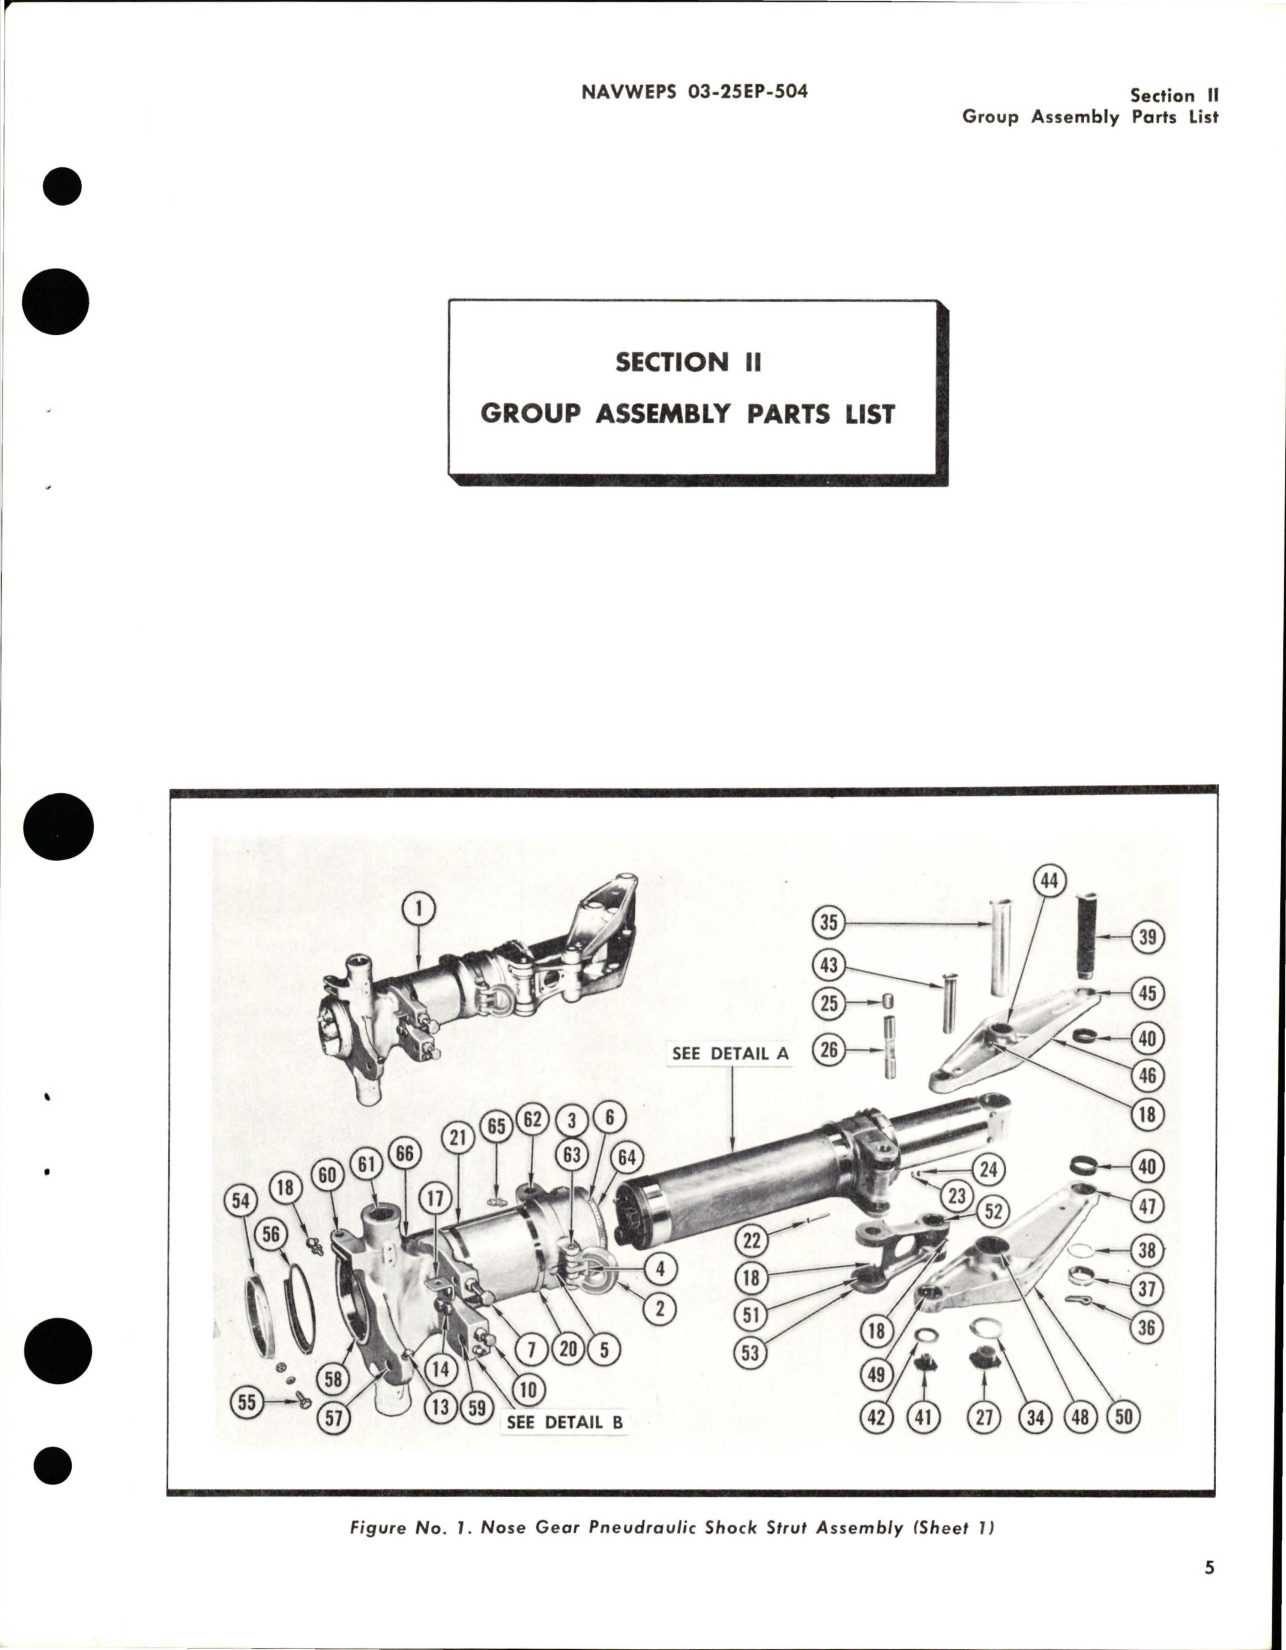 Sample page 7 from AirCorps Library document: Illustrated Parts Breakdown for Nose Gear Pneudraulic Shock Strut Assembly - Part 548600 Series